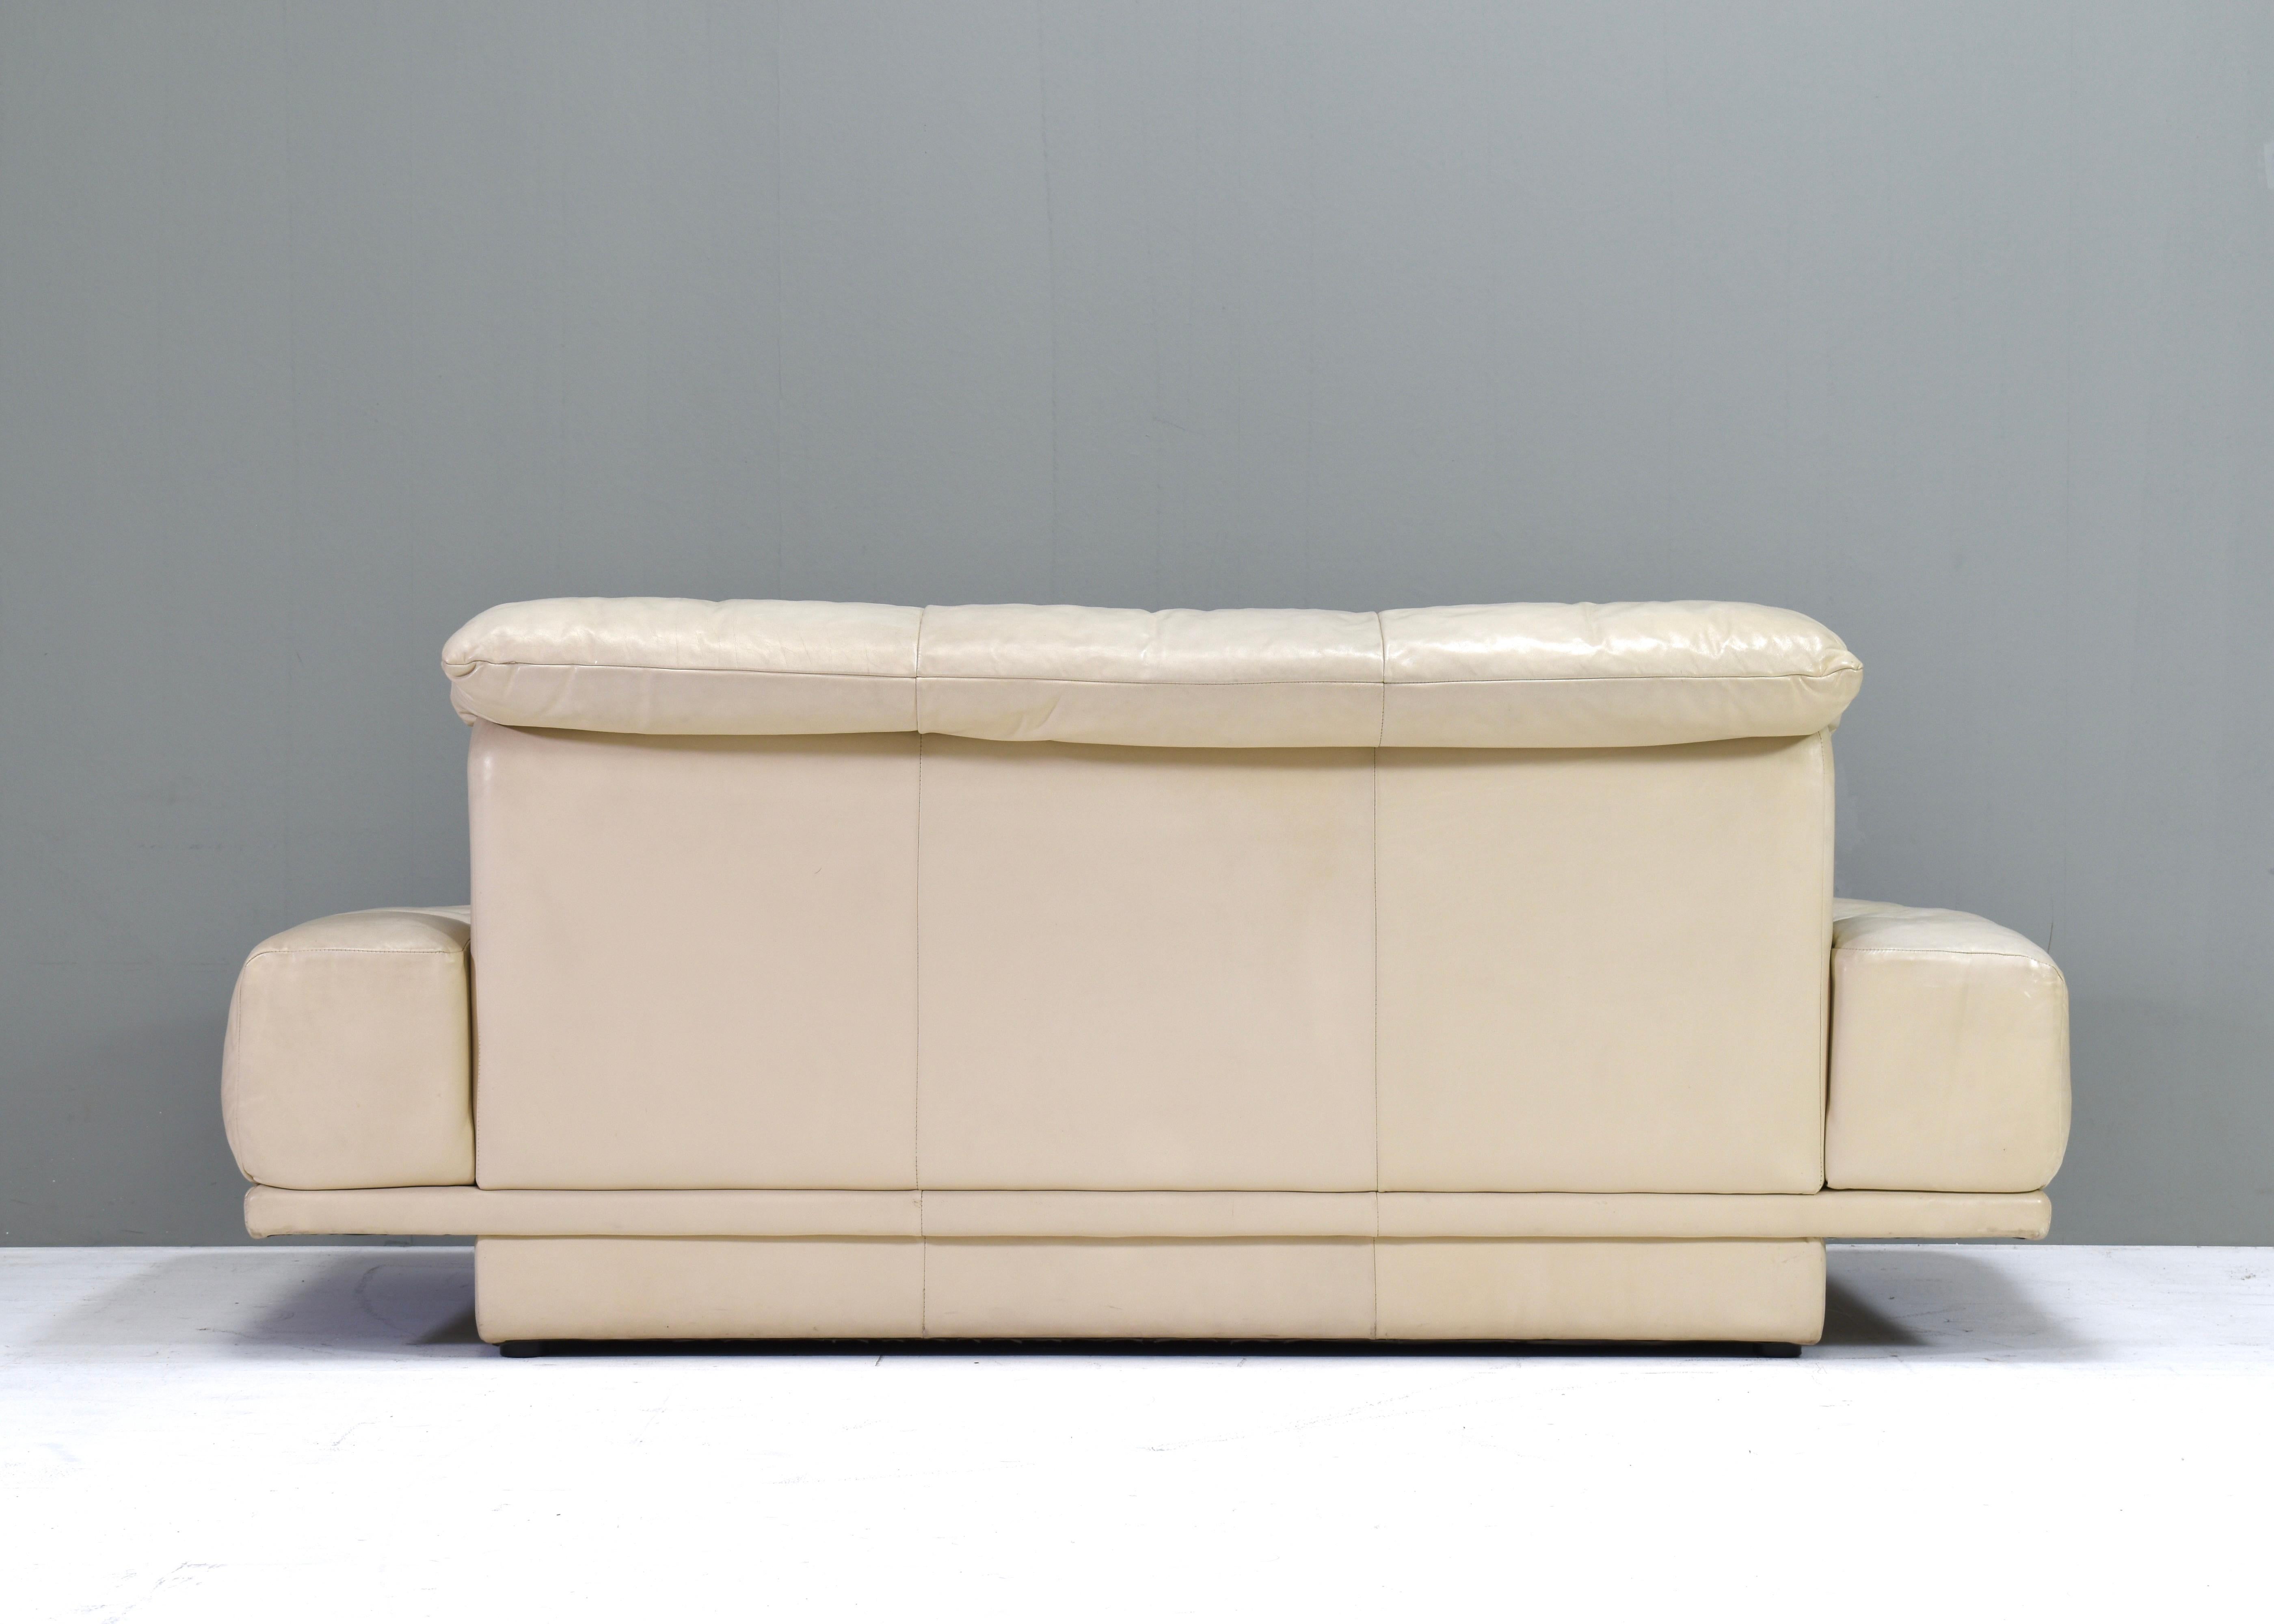 Pair of Rolf Benz sofa’s 2-seat and 3-seat – Germany, circa 1980-1990 For Sale 14